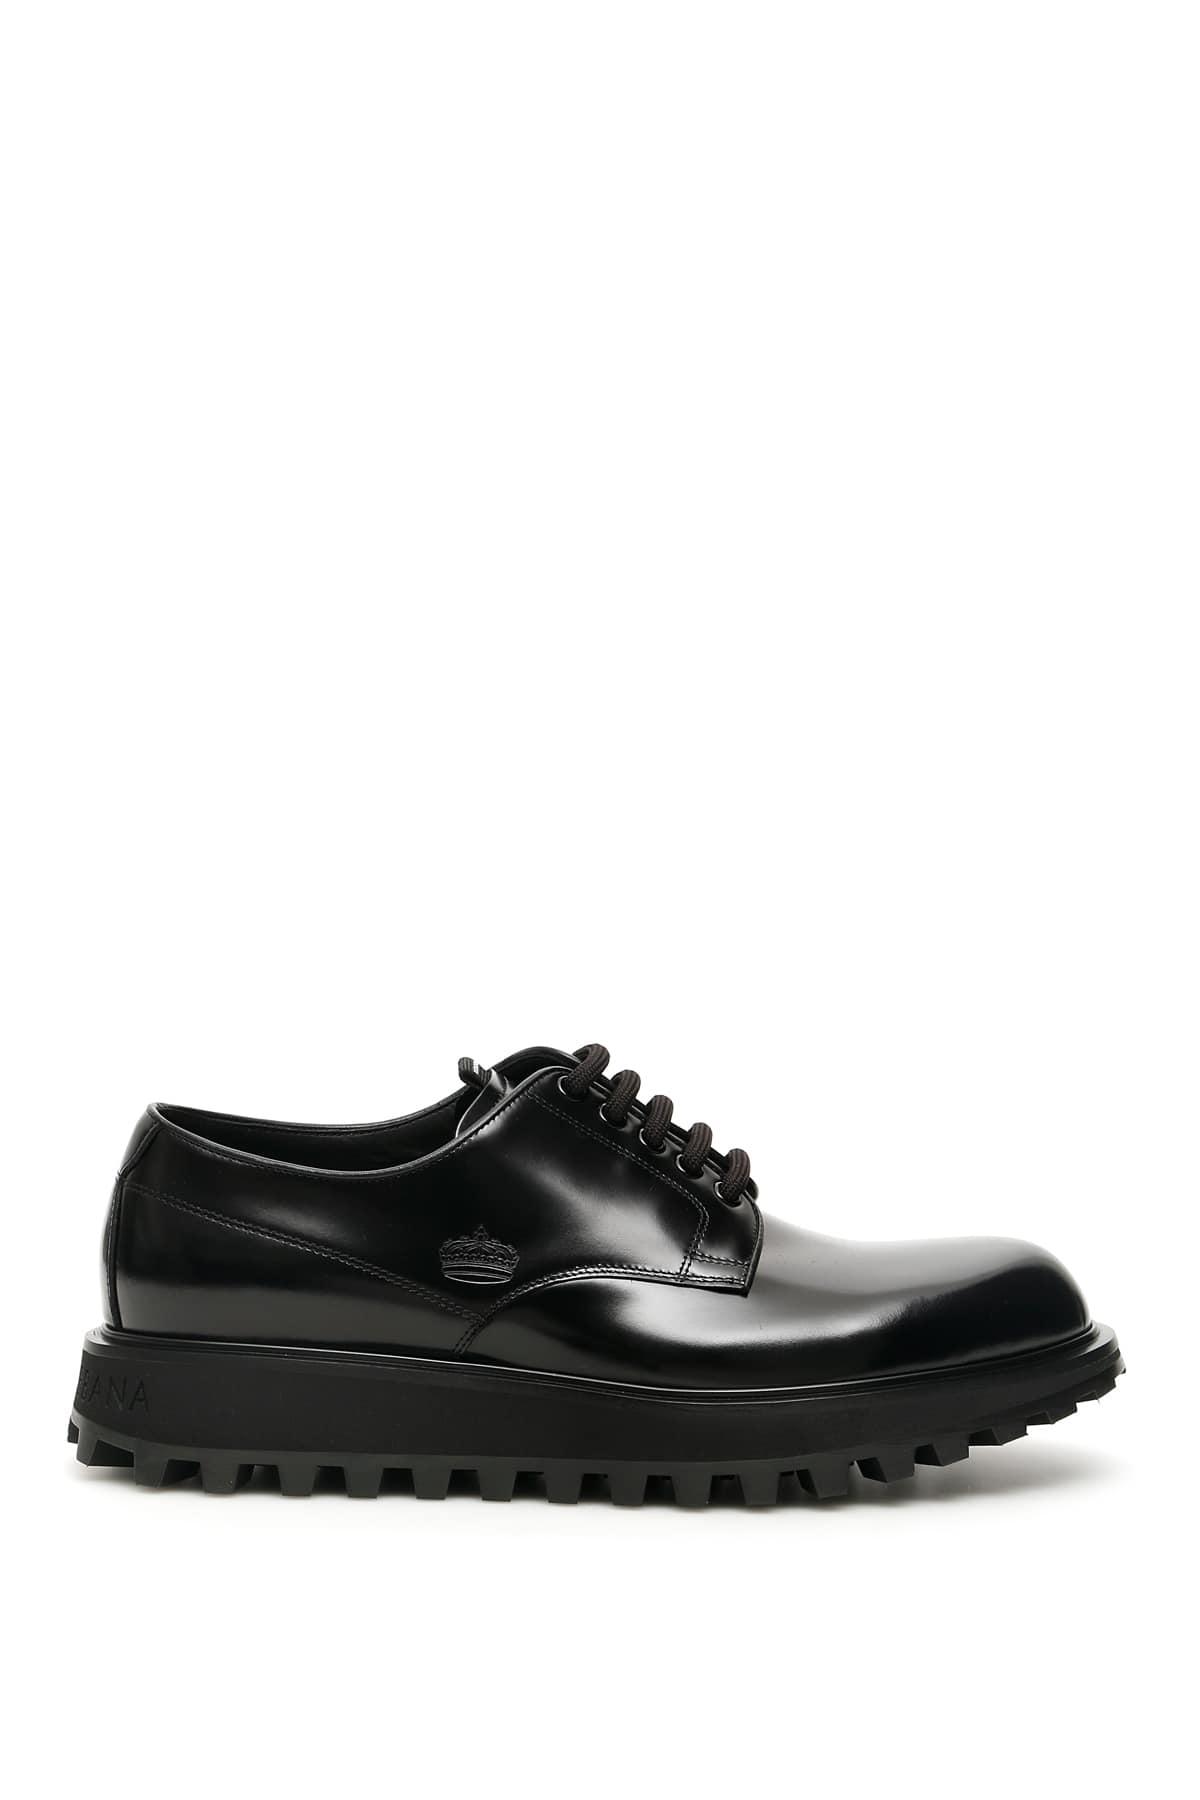 Dolce & Gabbana Leather 'naxos' Derby Shoes Black for Men - Save 37% - Lyst